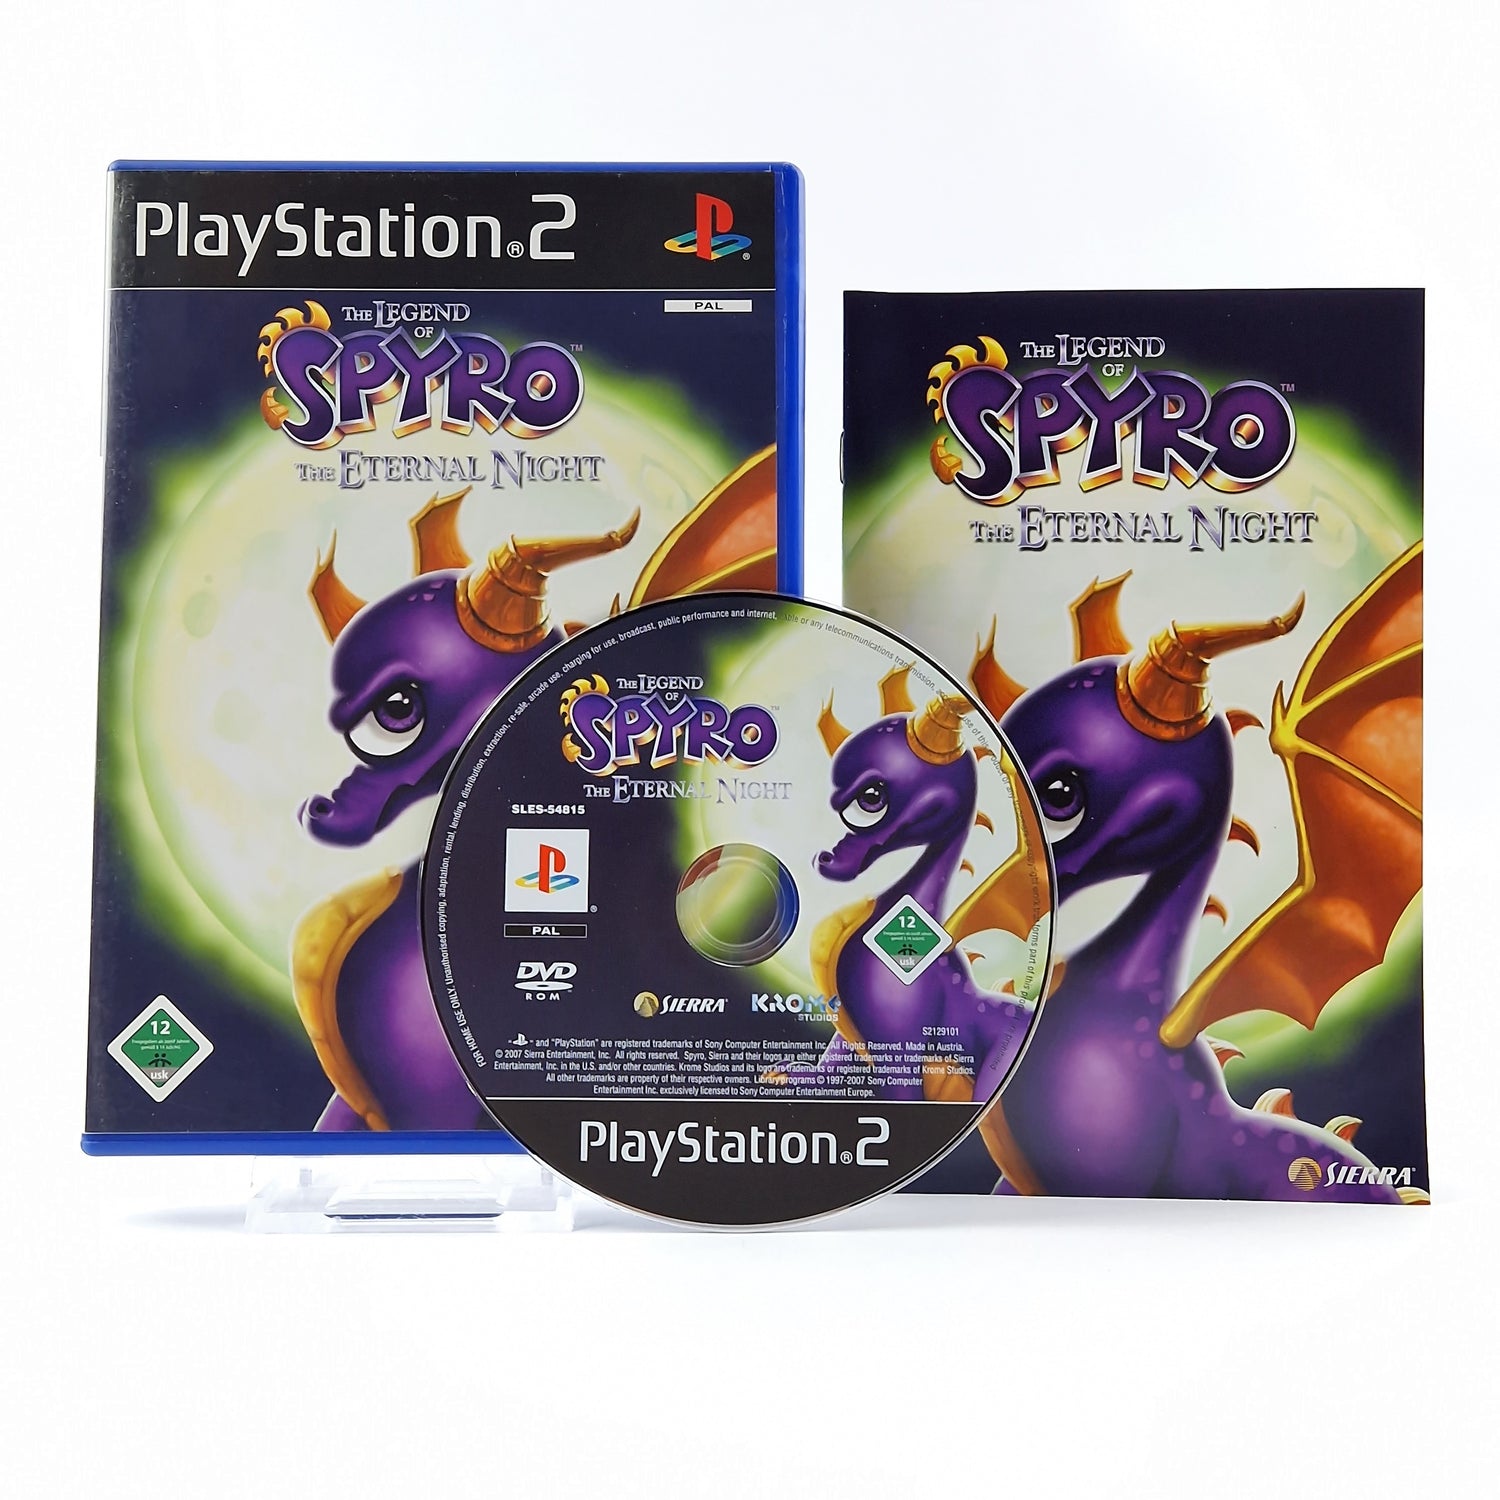 Playstation 2 game: The Legend of Spyro The Eternal Night - OVP instructions CD